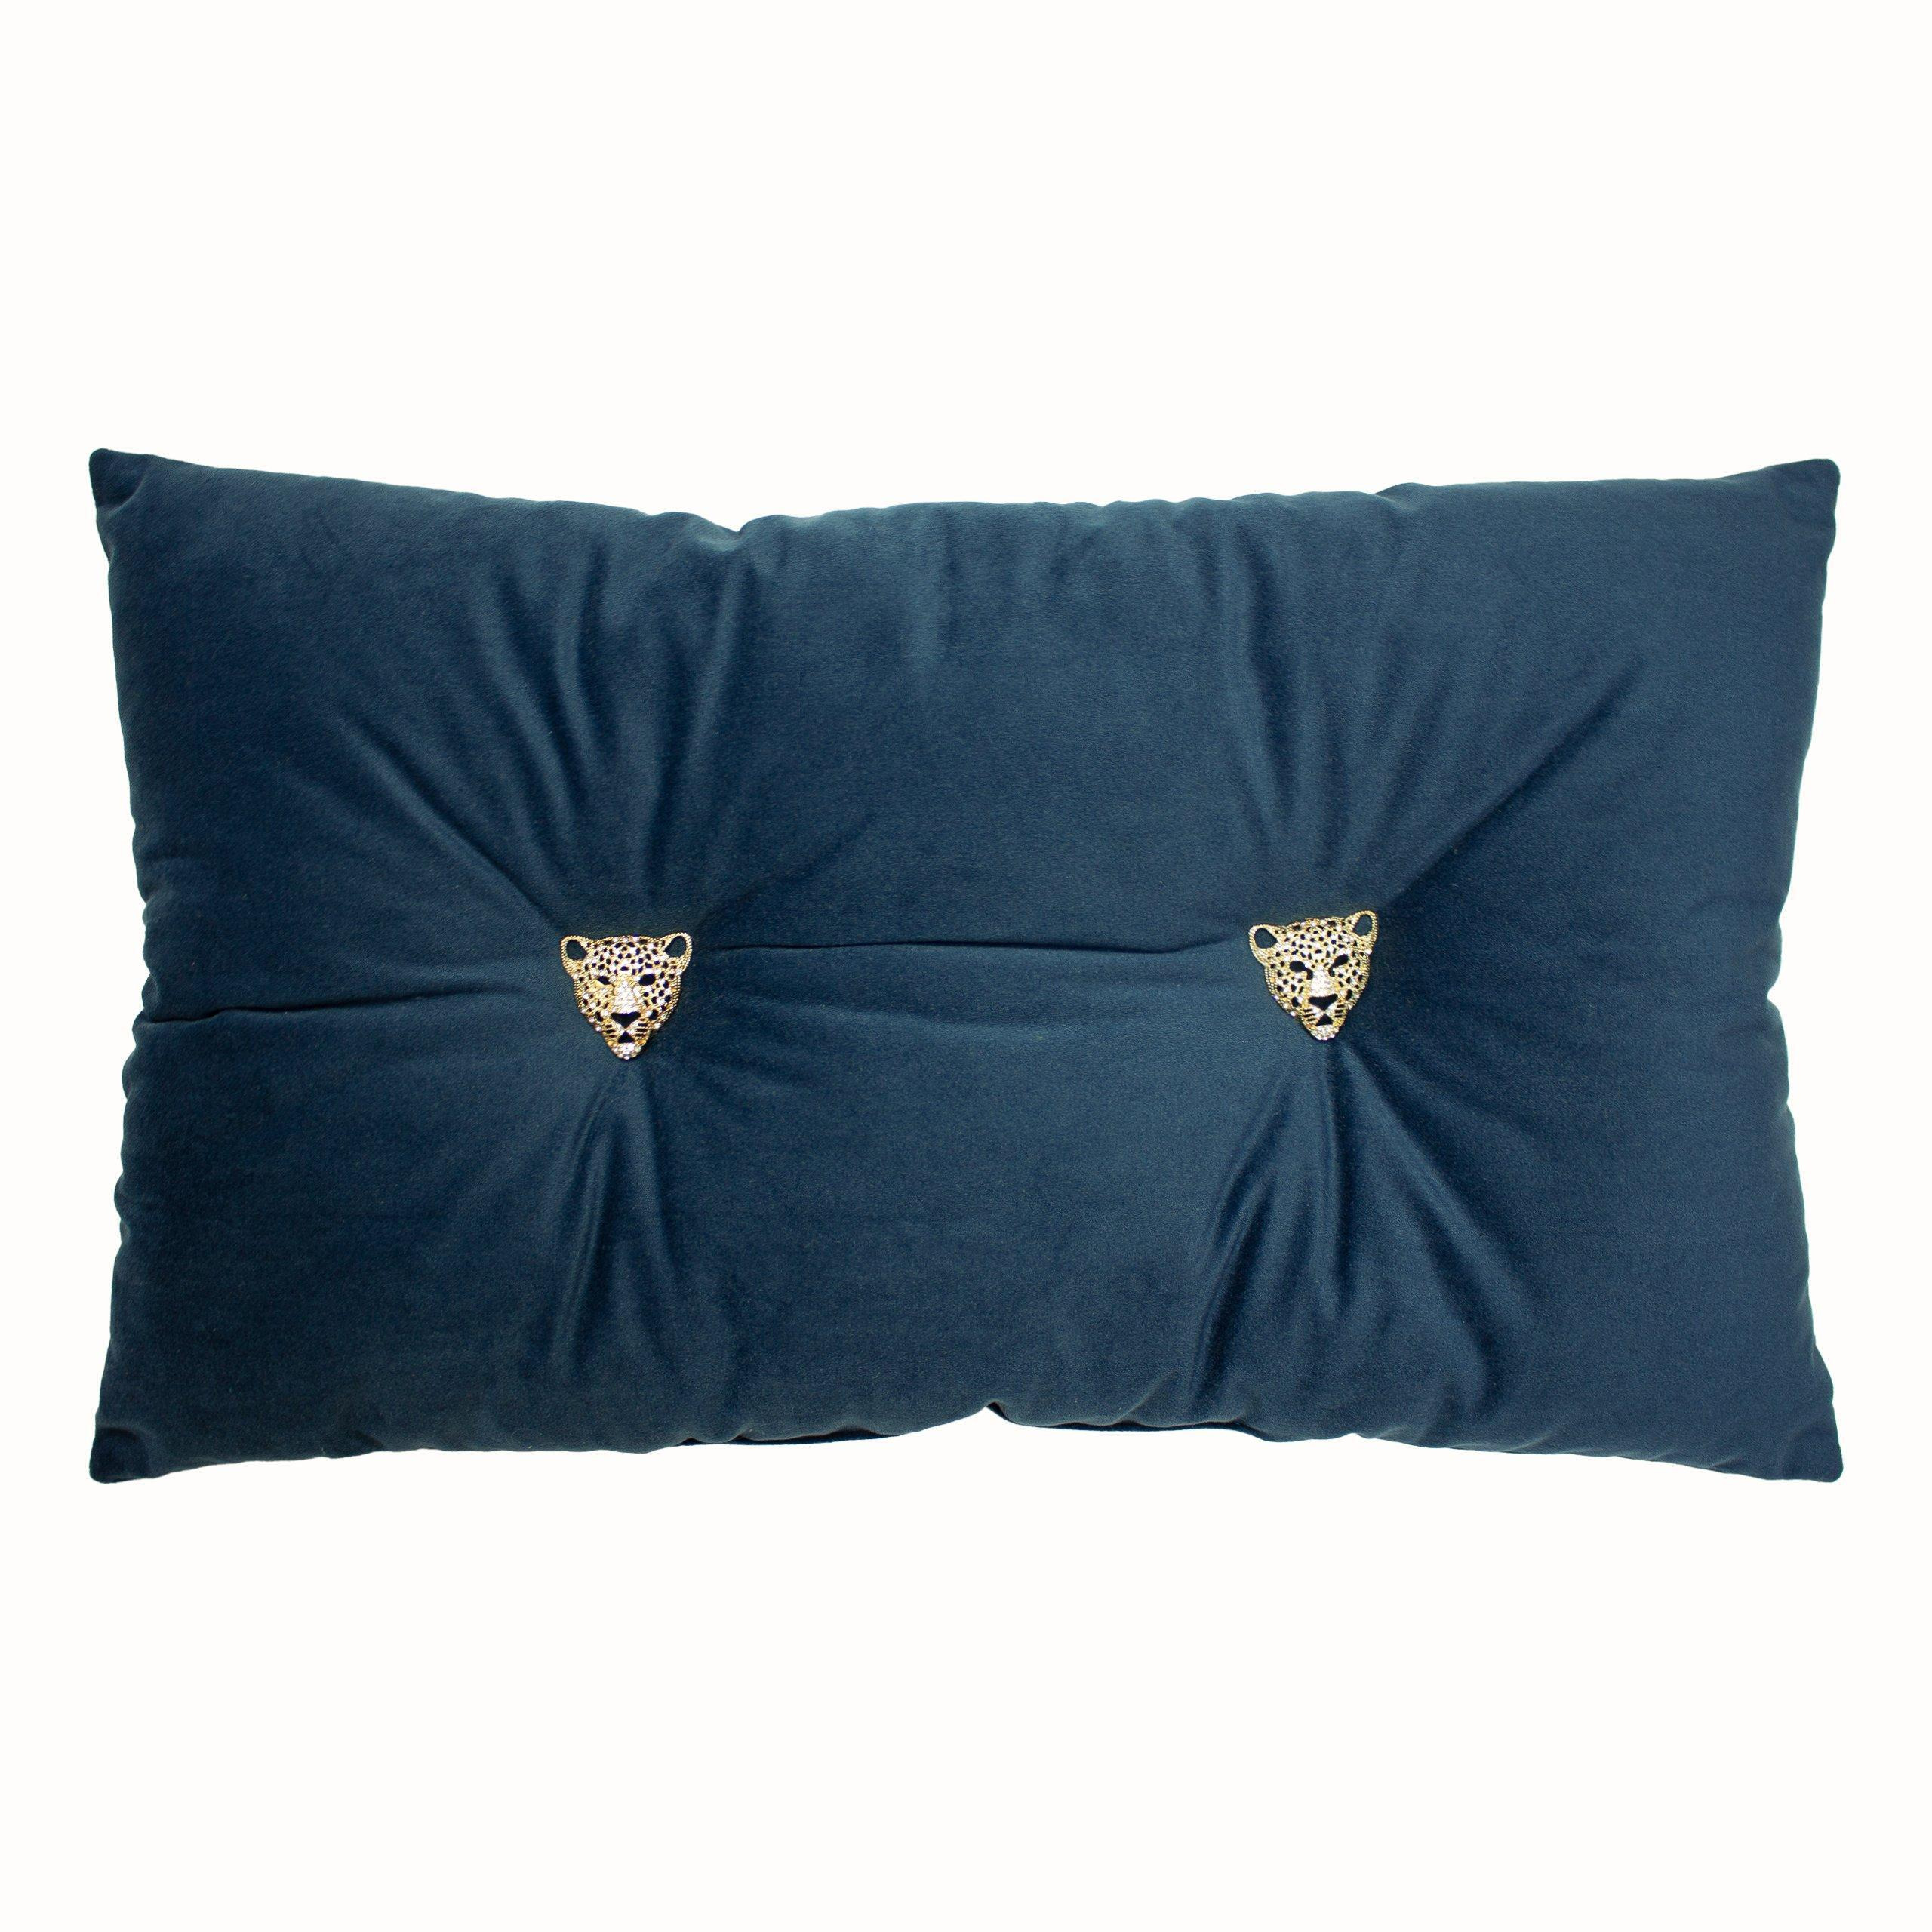 Panther Velvet Ready Filled Cushion - image 1